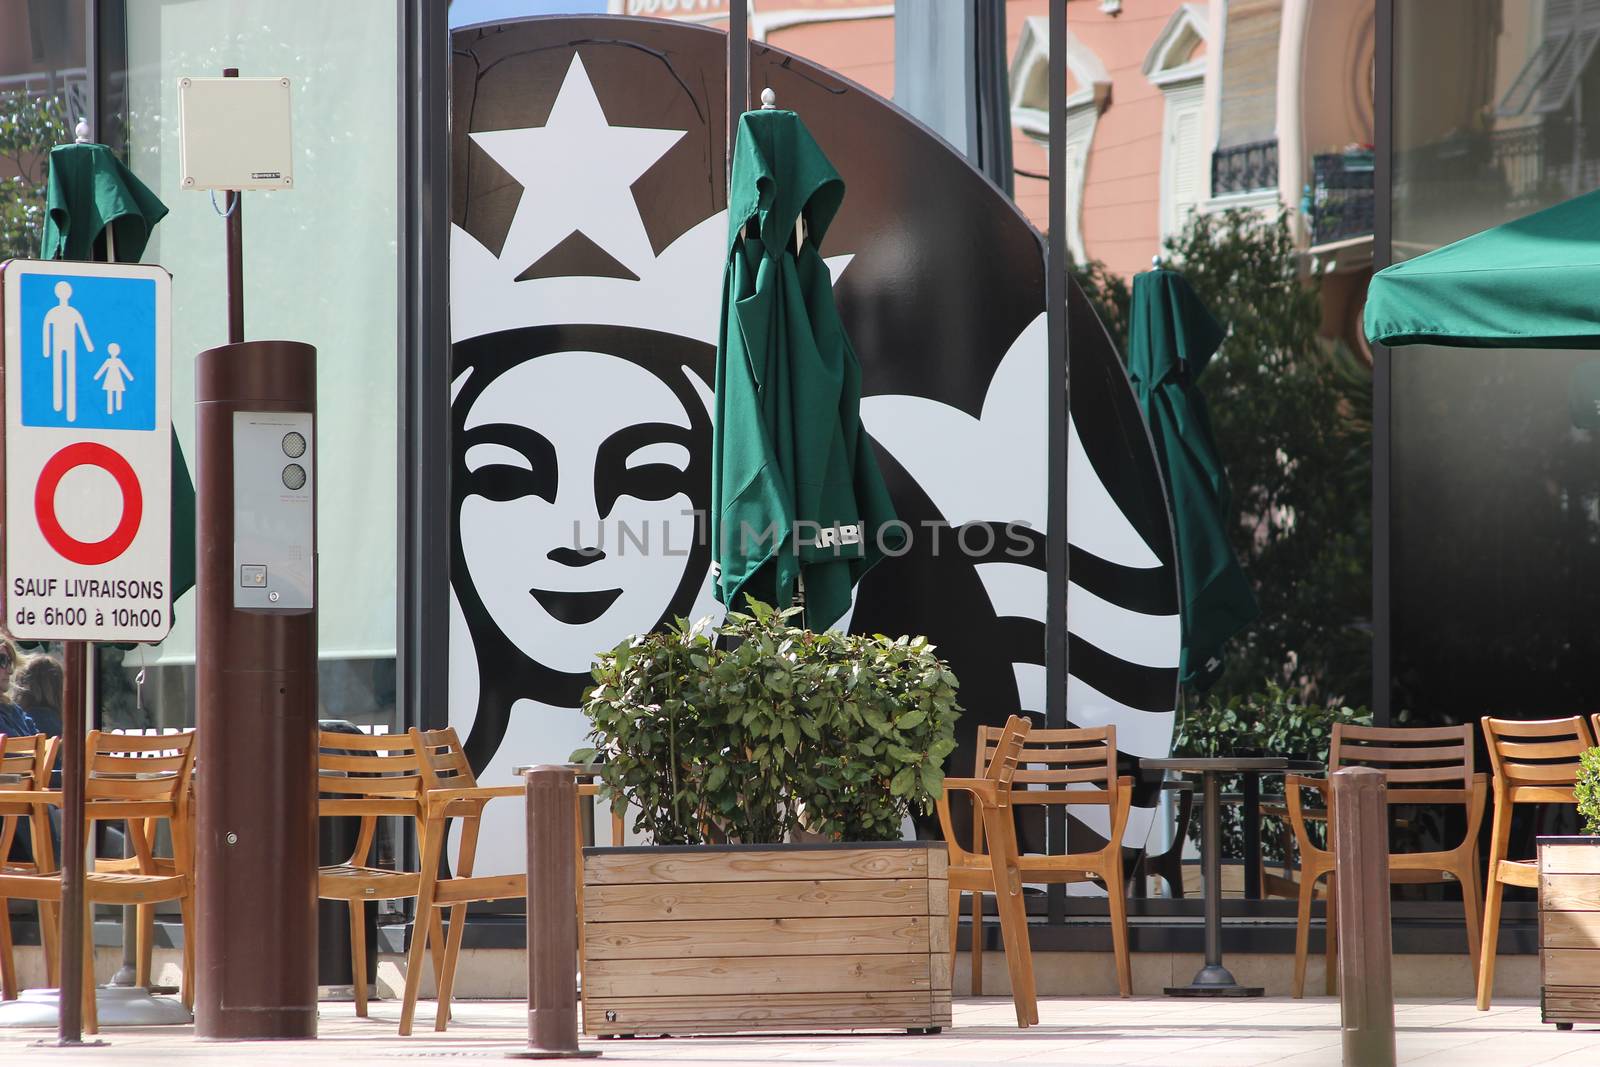 Monte-Carlo, Monaco - March 9, 2016: Starbucks Sign is Displayed at the Facade of a Starbucks Store. Starbucks Corporation is an American Coffee Company and the Largest Coffeehouse Company in the world with 23,450 Stores in 67 Countries